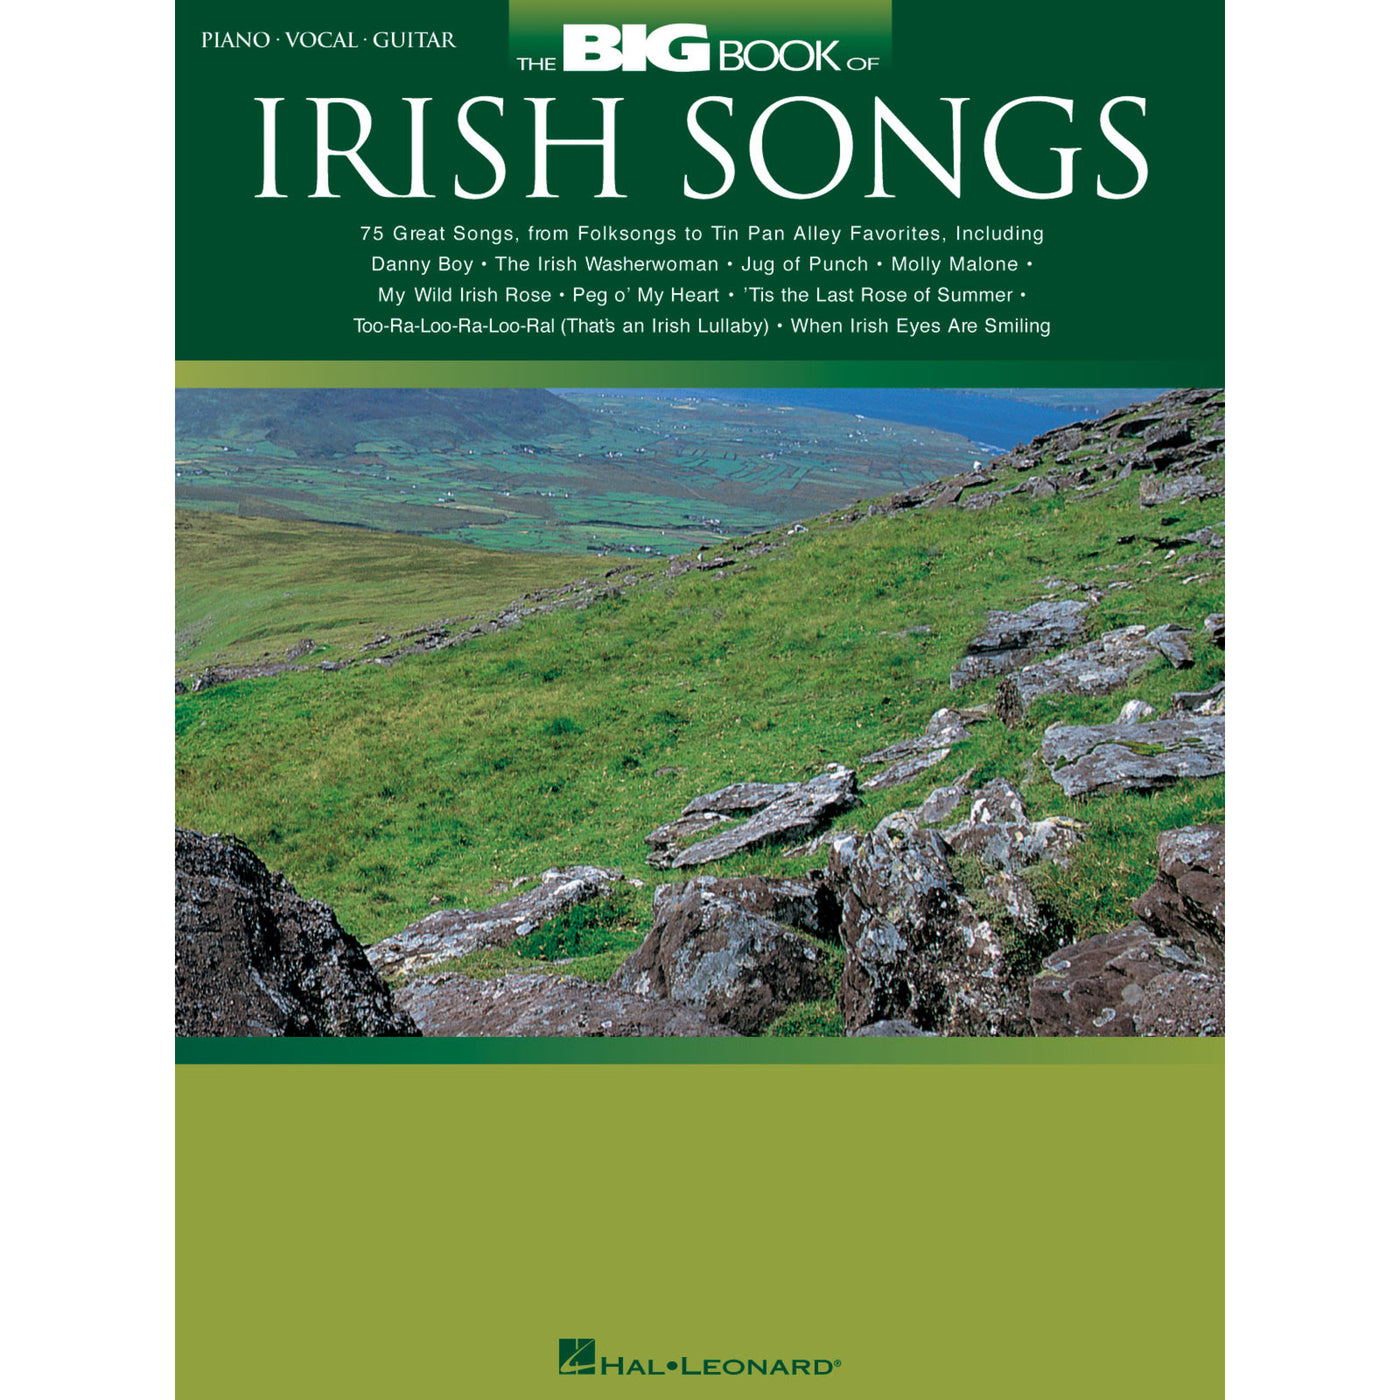 The Big Book of Irish Songs Booklet – Interstate Music